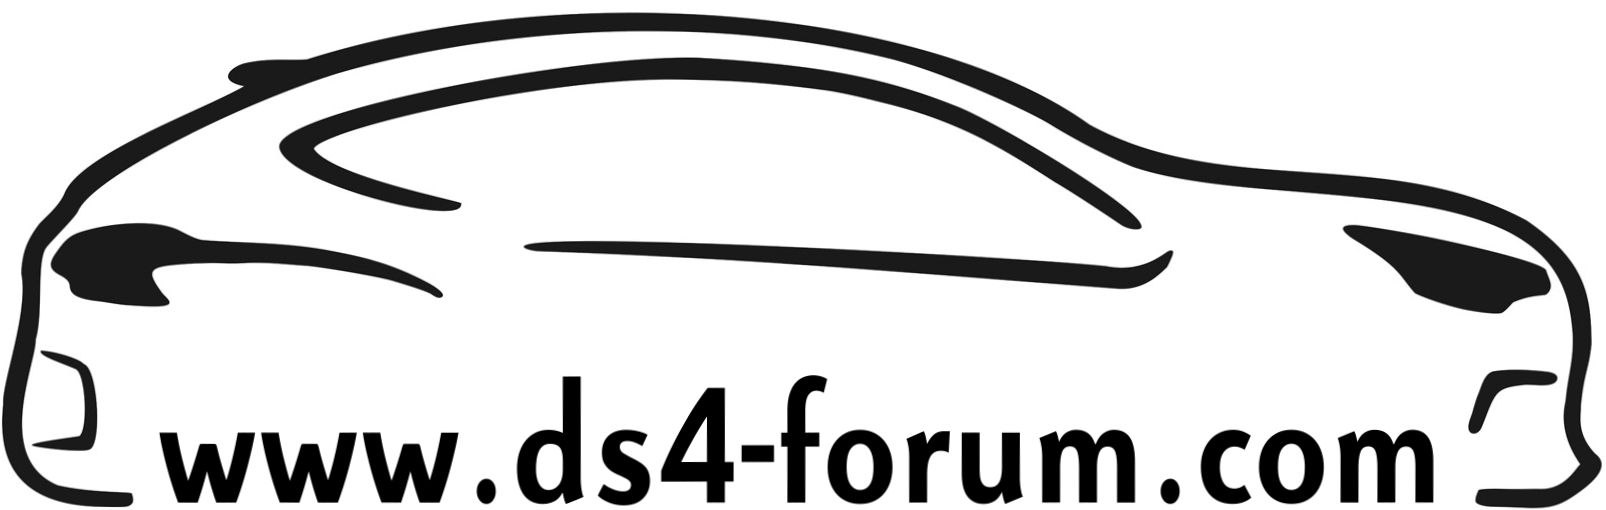 ds4-forum-logo.png